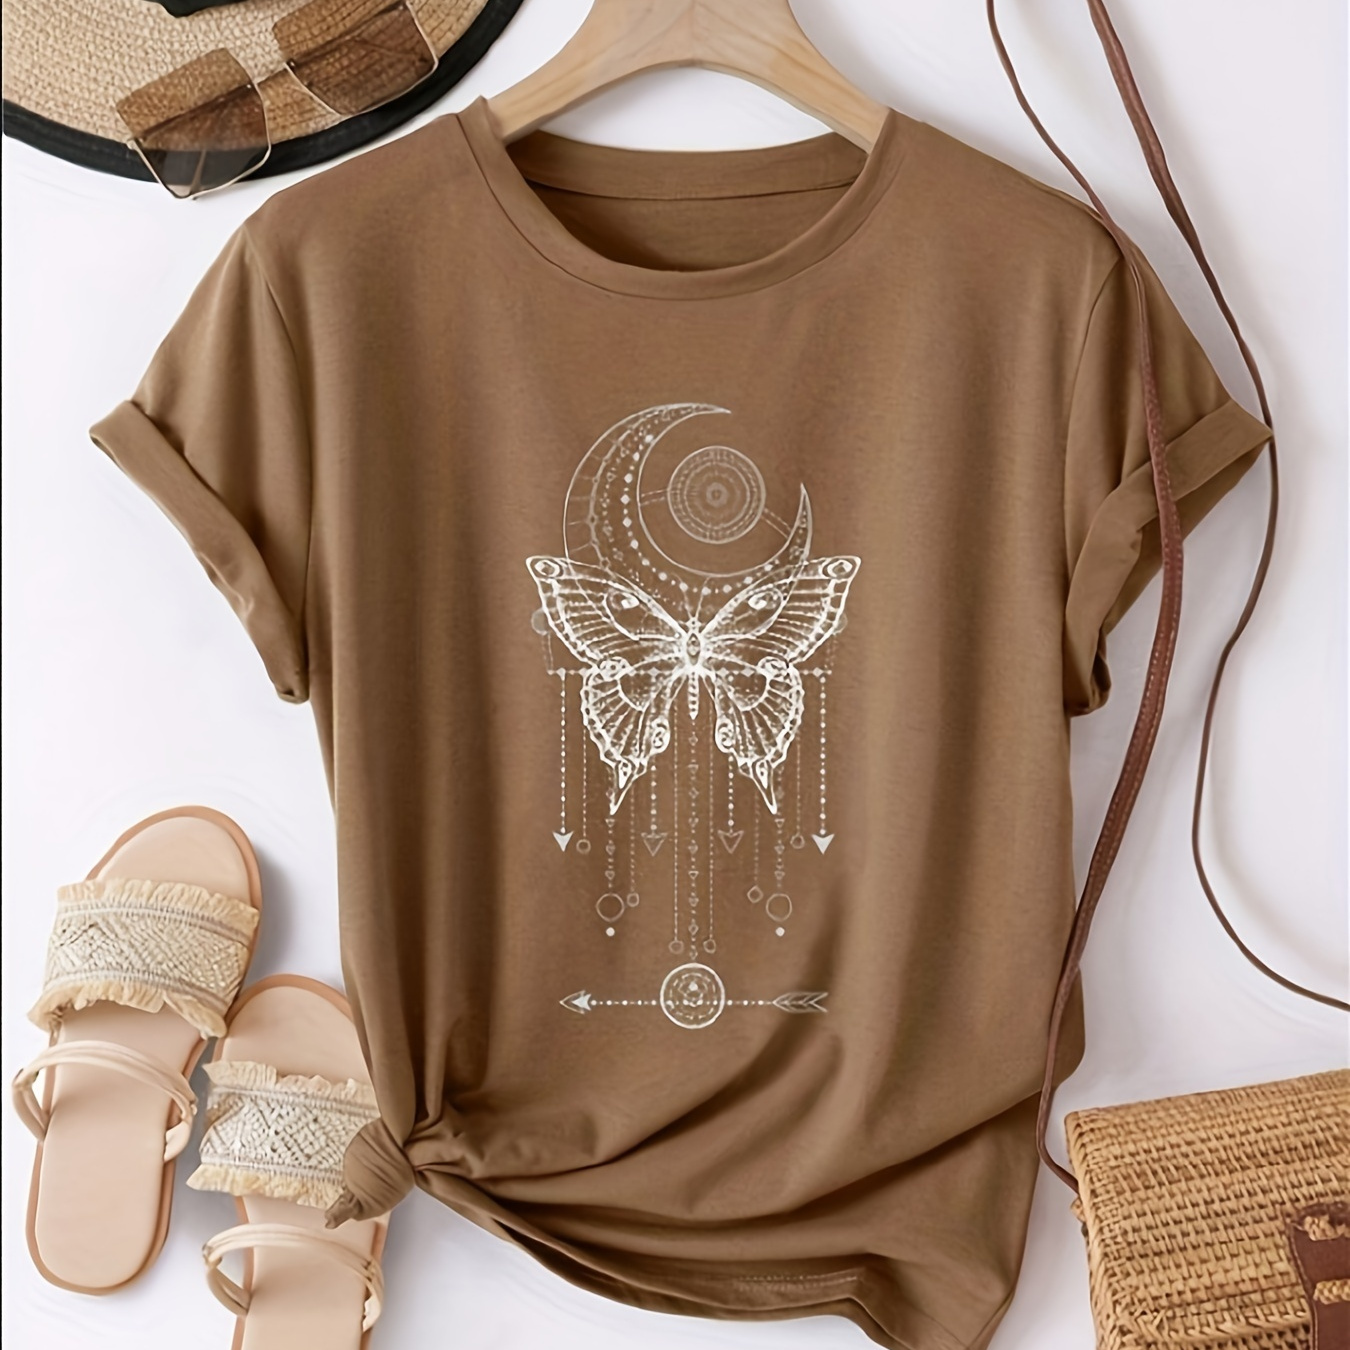 

Butterfly & Moon Print Vintage T-shirt, Crew Neck Short Sleeve Top For Spring & Summer, Women's Clothing